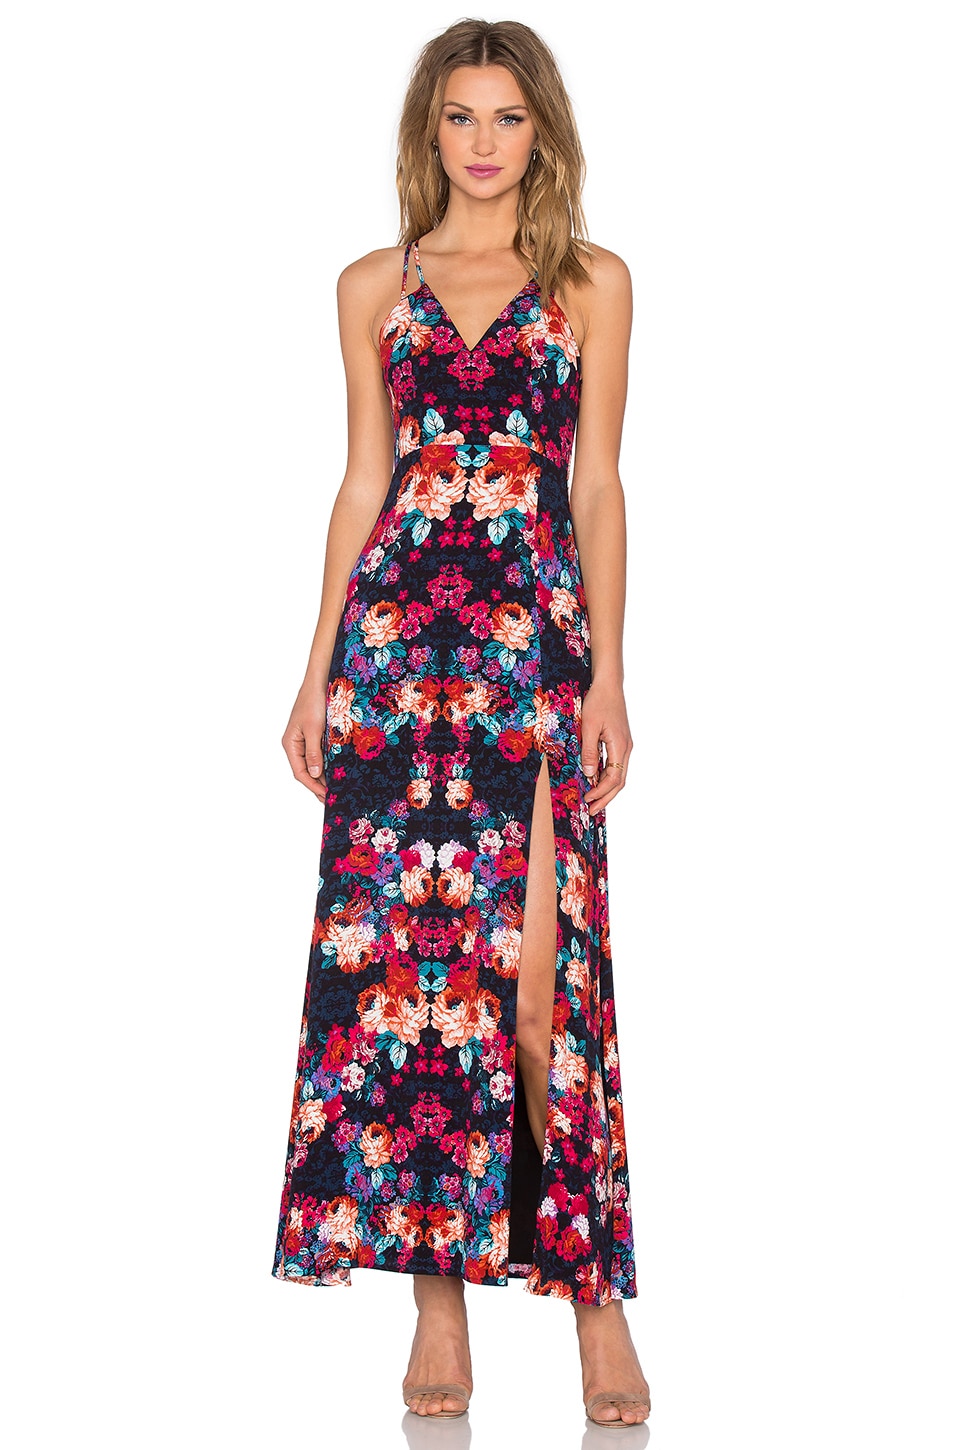 NBD x Naven Twins All For You Maxi Dress in Multi Floral | REVOLVE